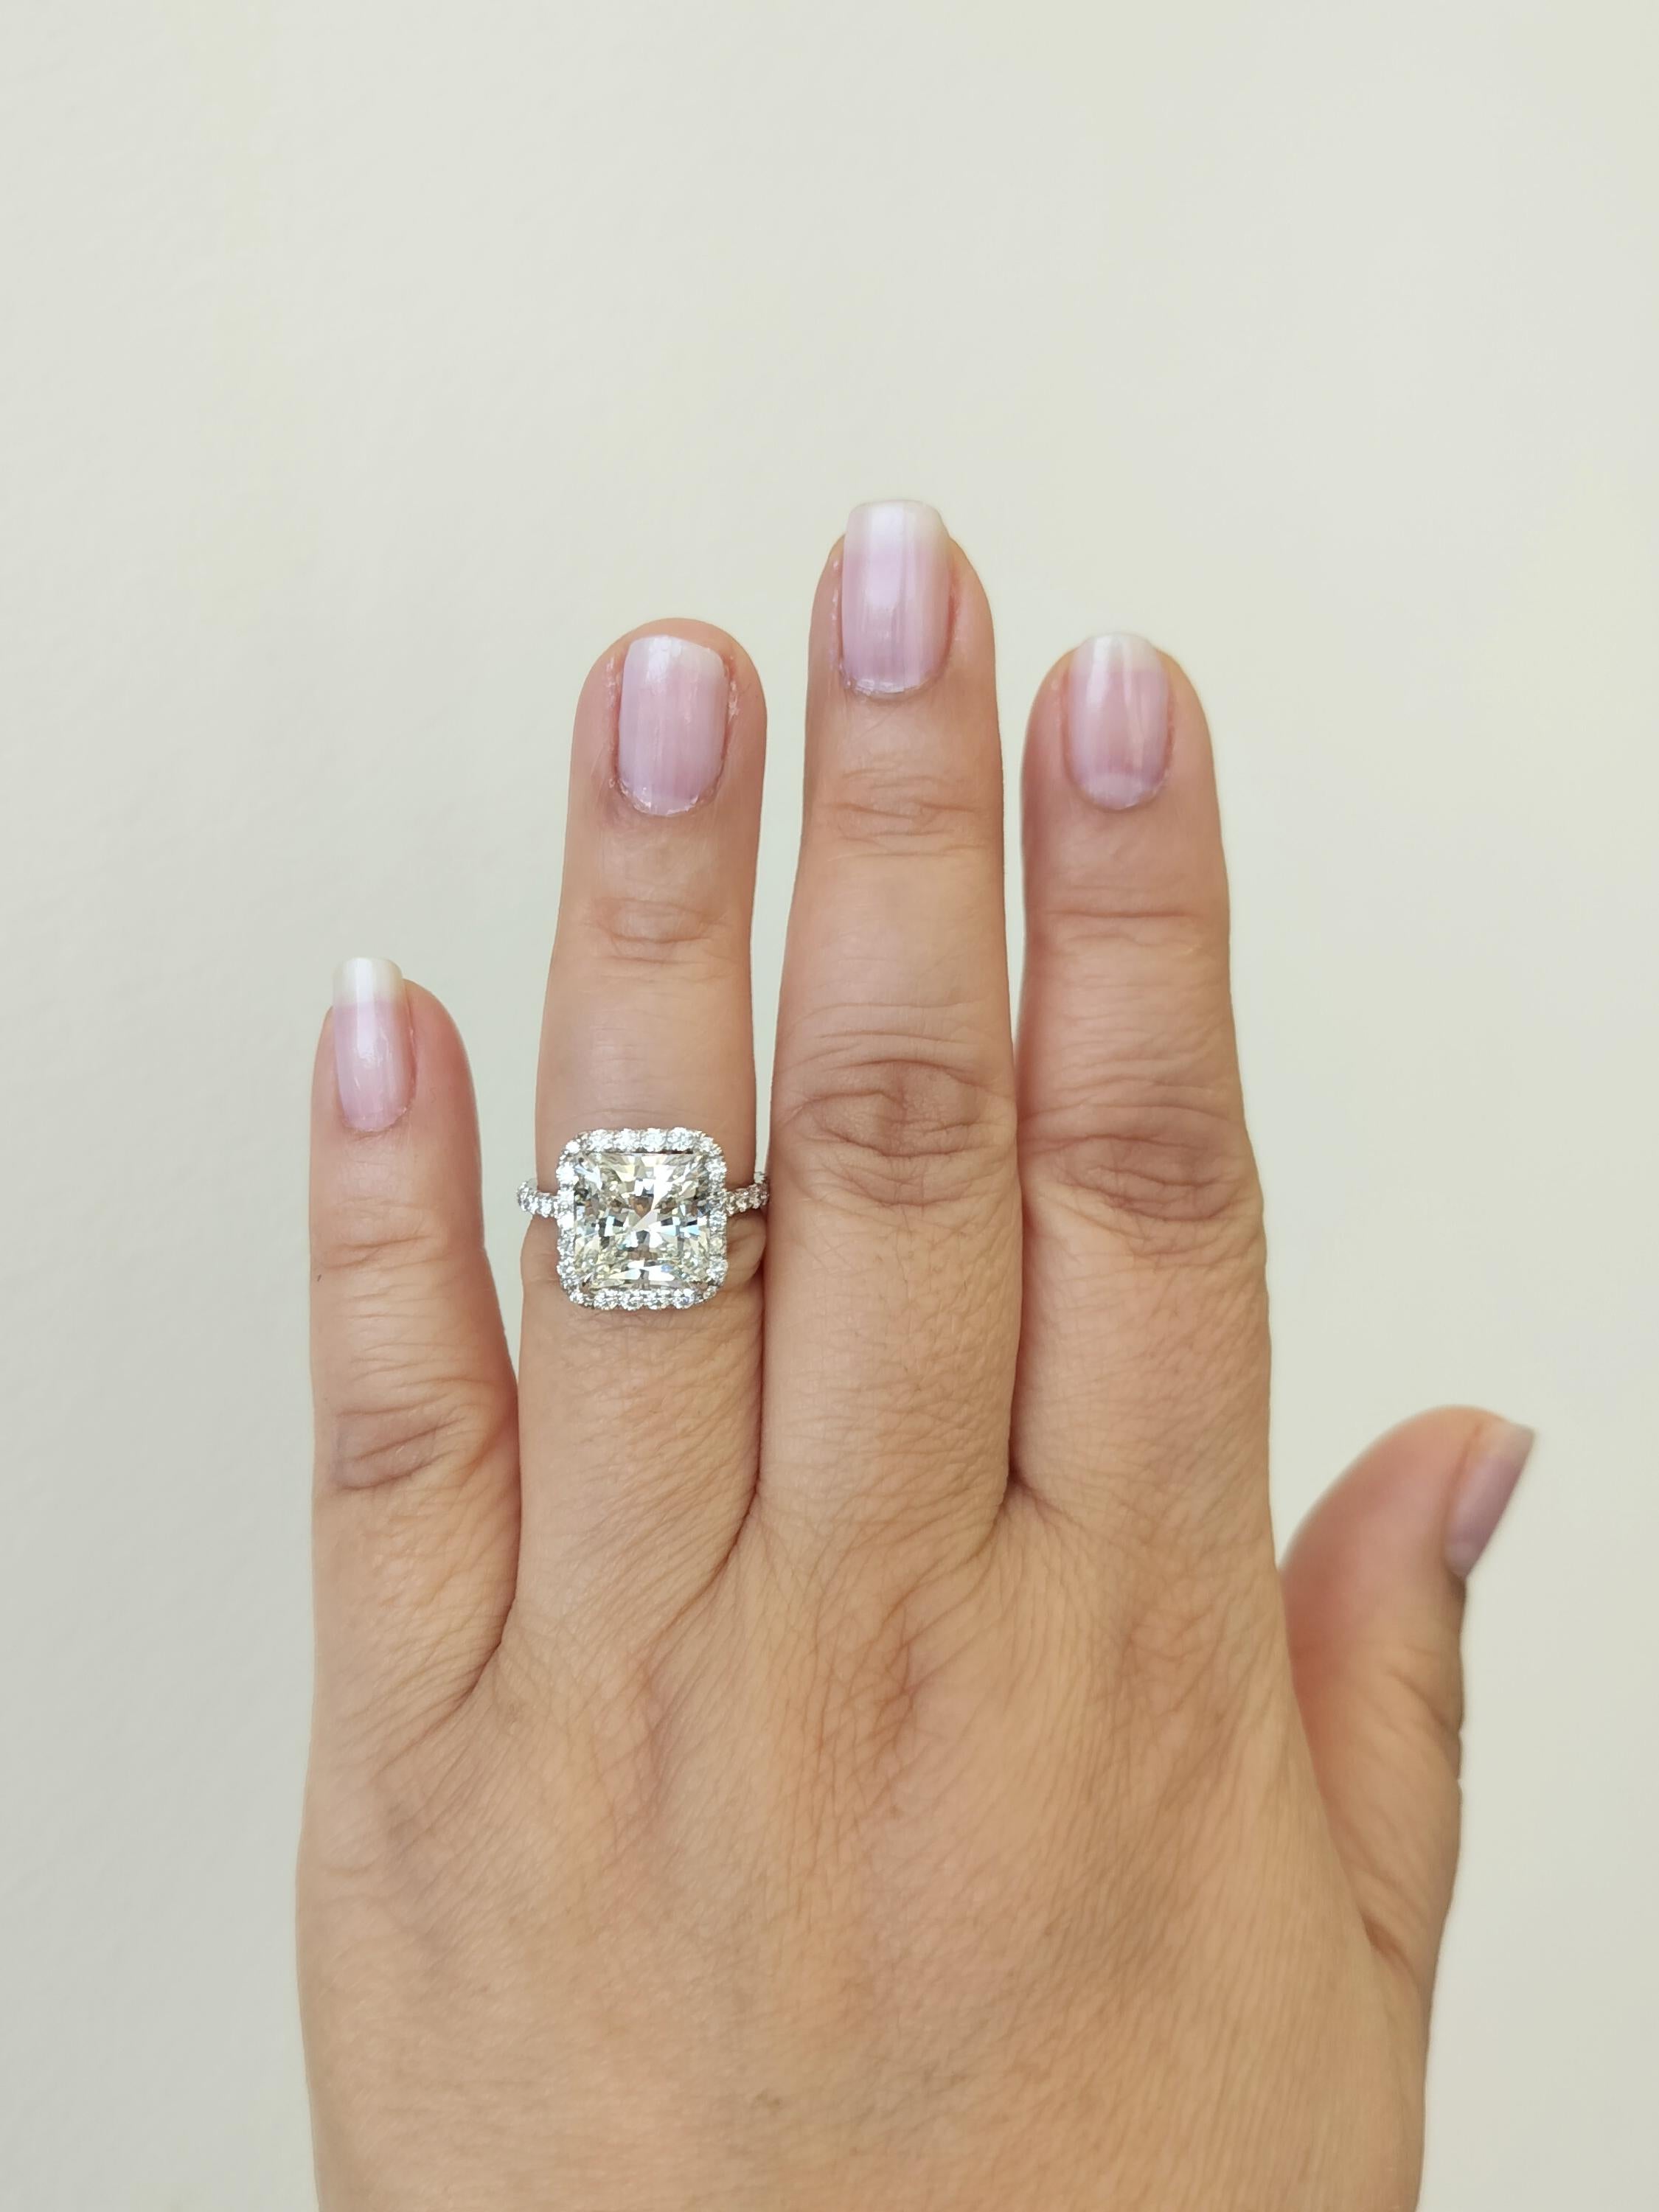 Stunning 5.27 ct. GIA I VS2 white diamond radiant cut with good quality smaller white diamond rounds.  Handmade in 18k white gold.  Ring size 7.  GIA certificate is included.